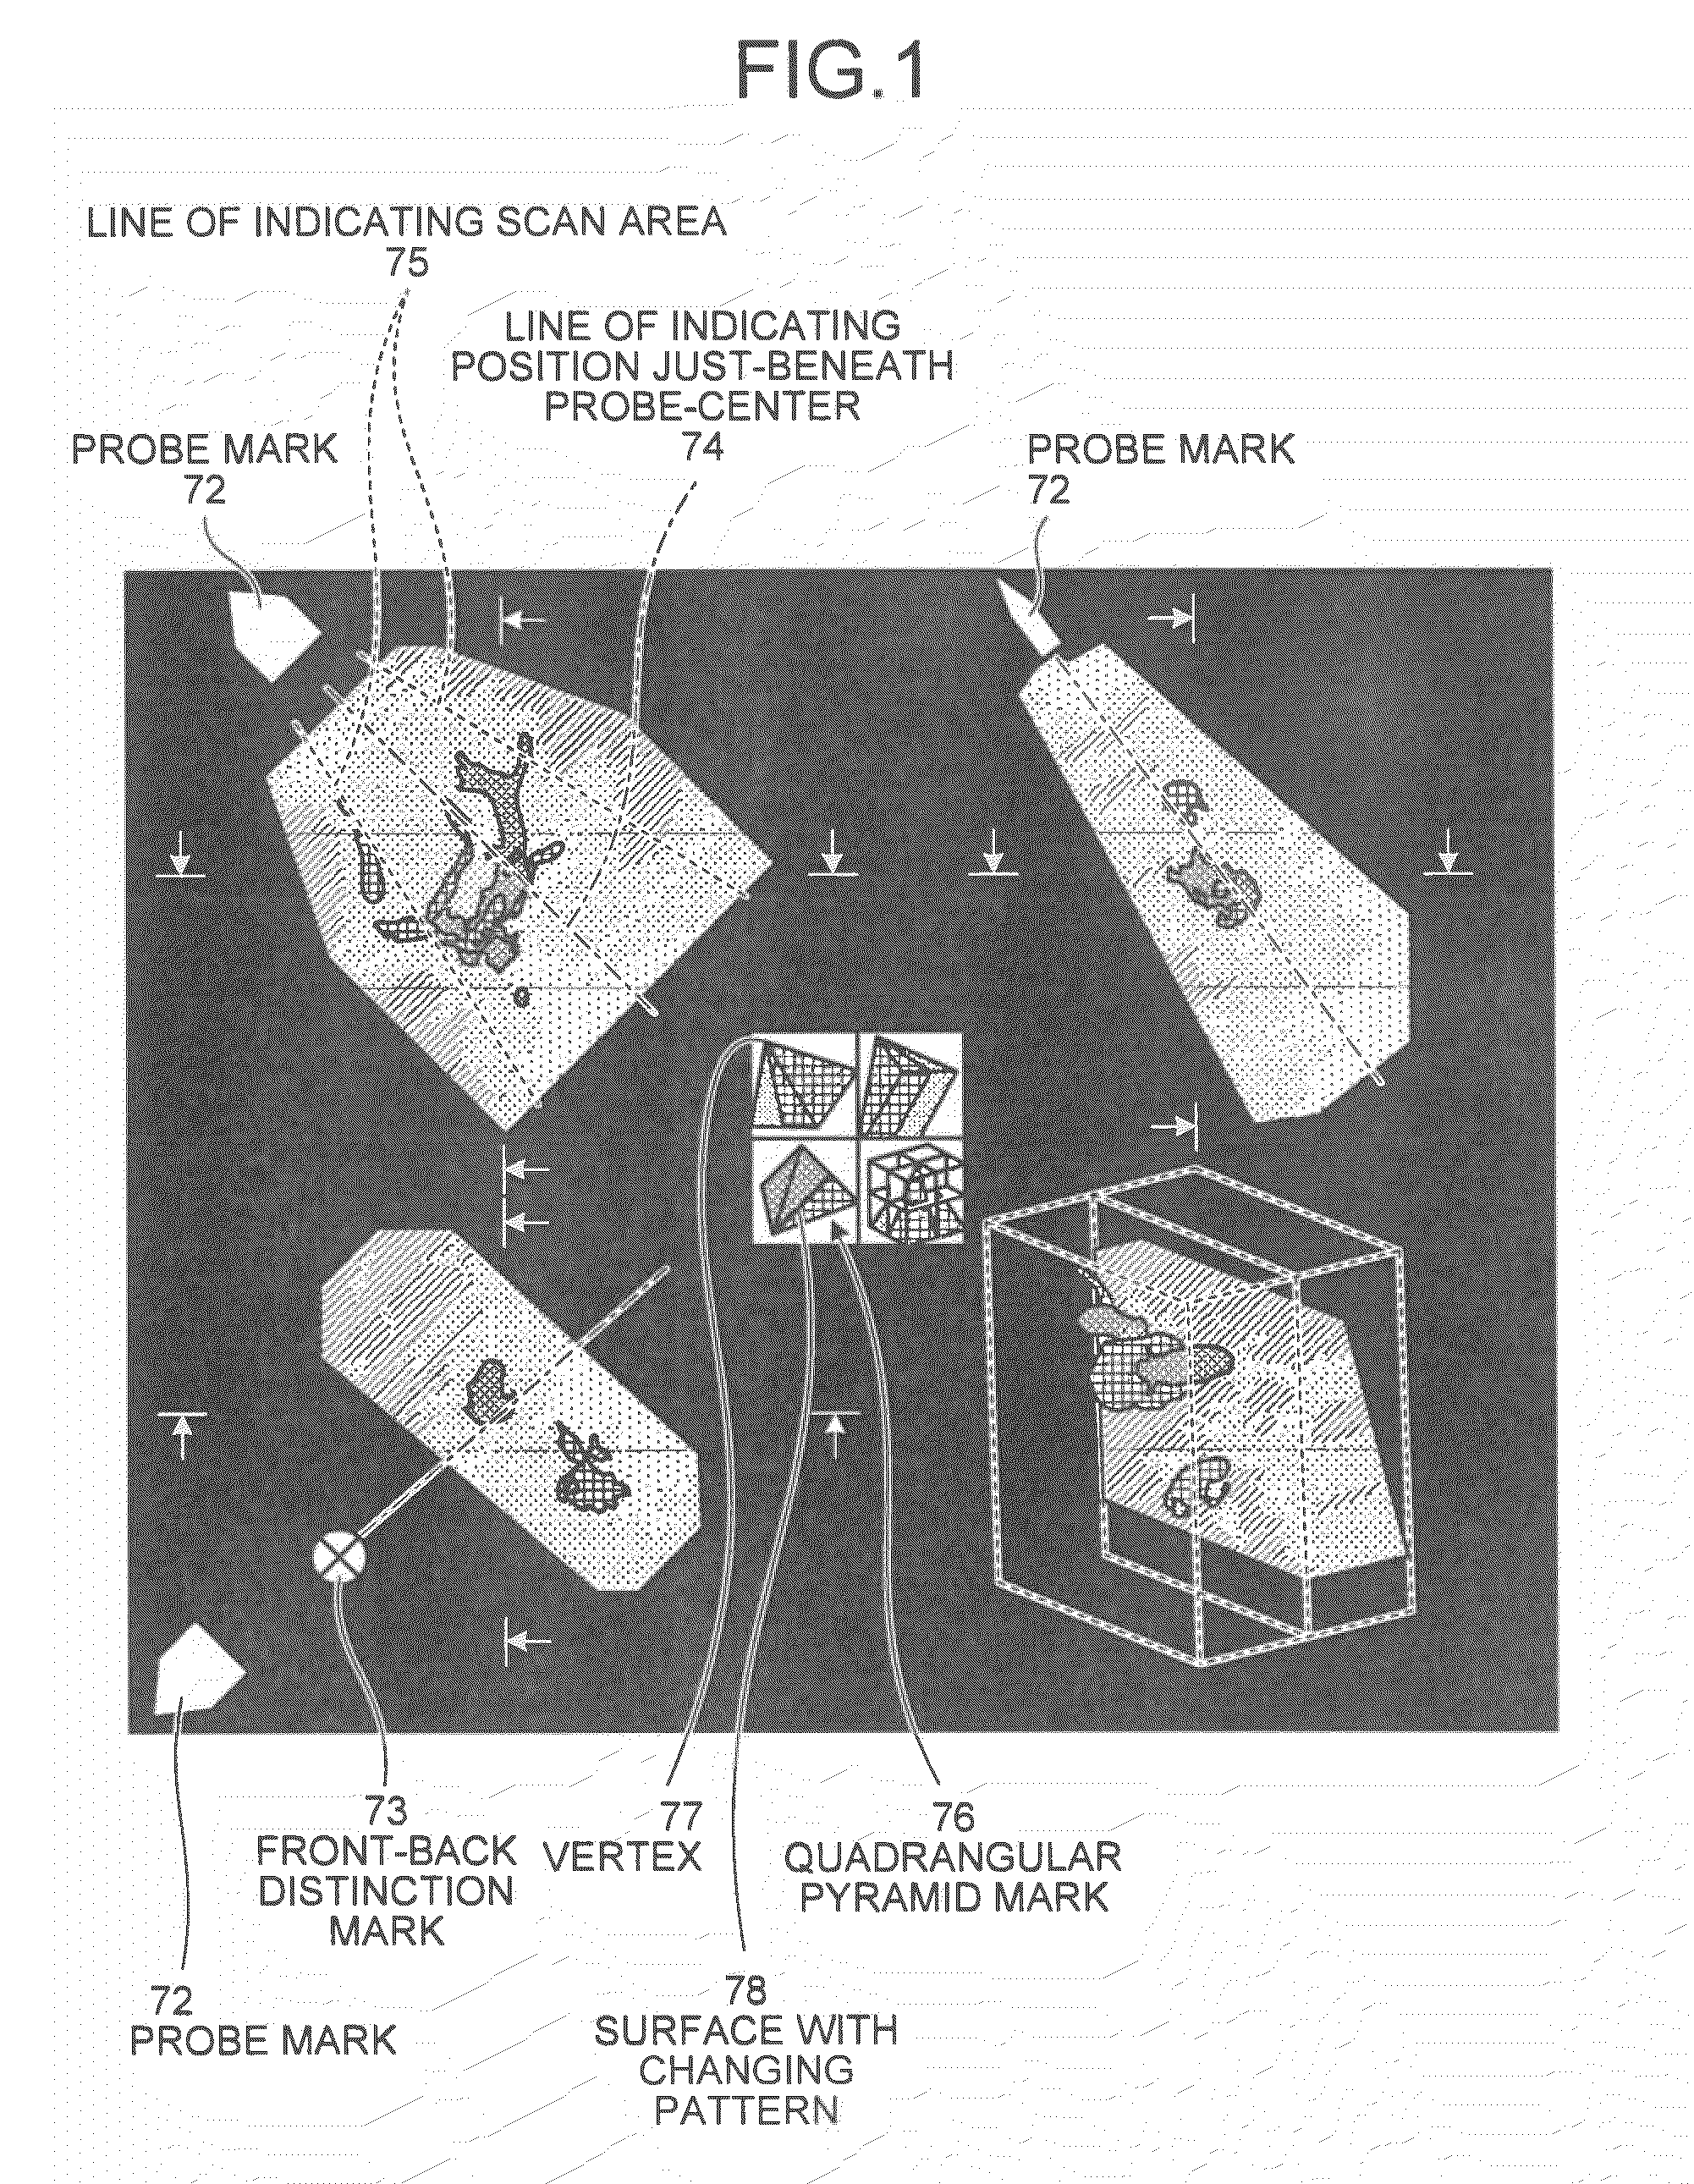 Ultrasound imaging apparatus, image processing apparatus, image processing method, and computer program product